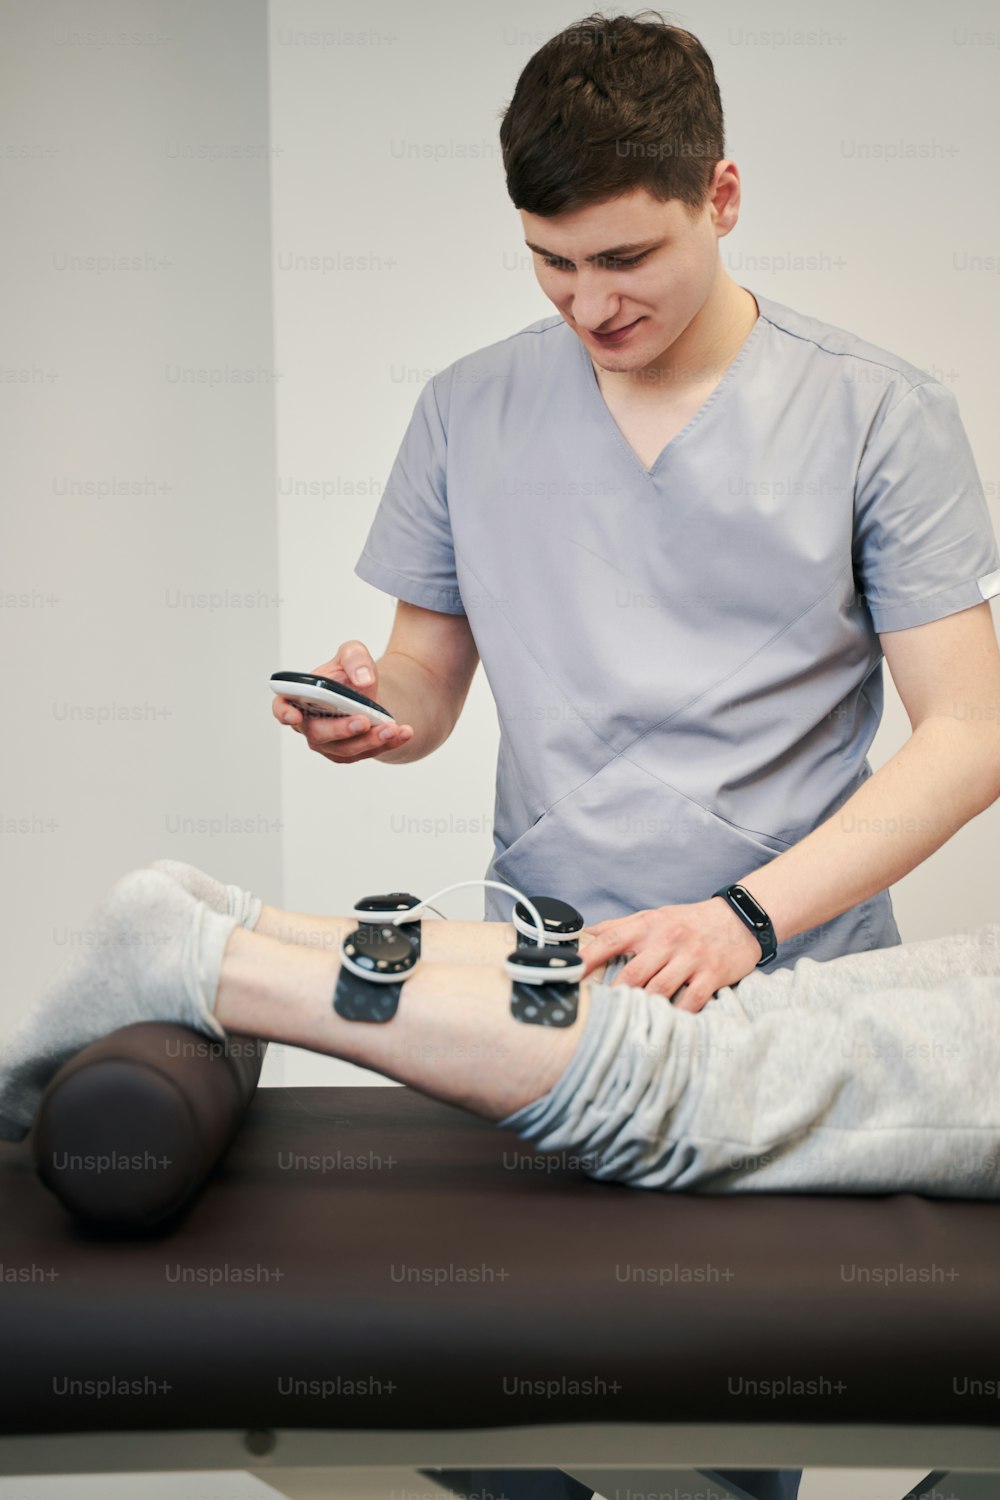 Medical professional pressing snap electrodes to person leg while touching the display of muscle stimulation unit